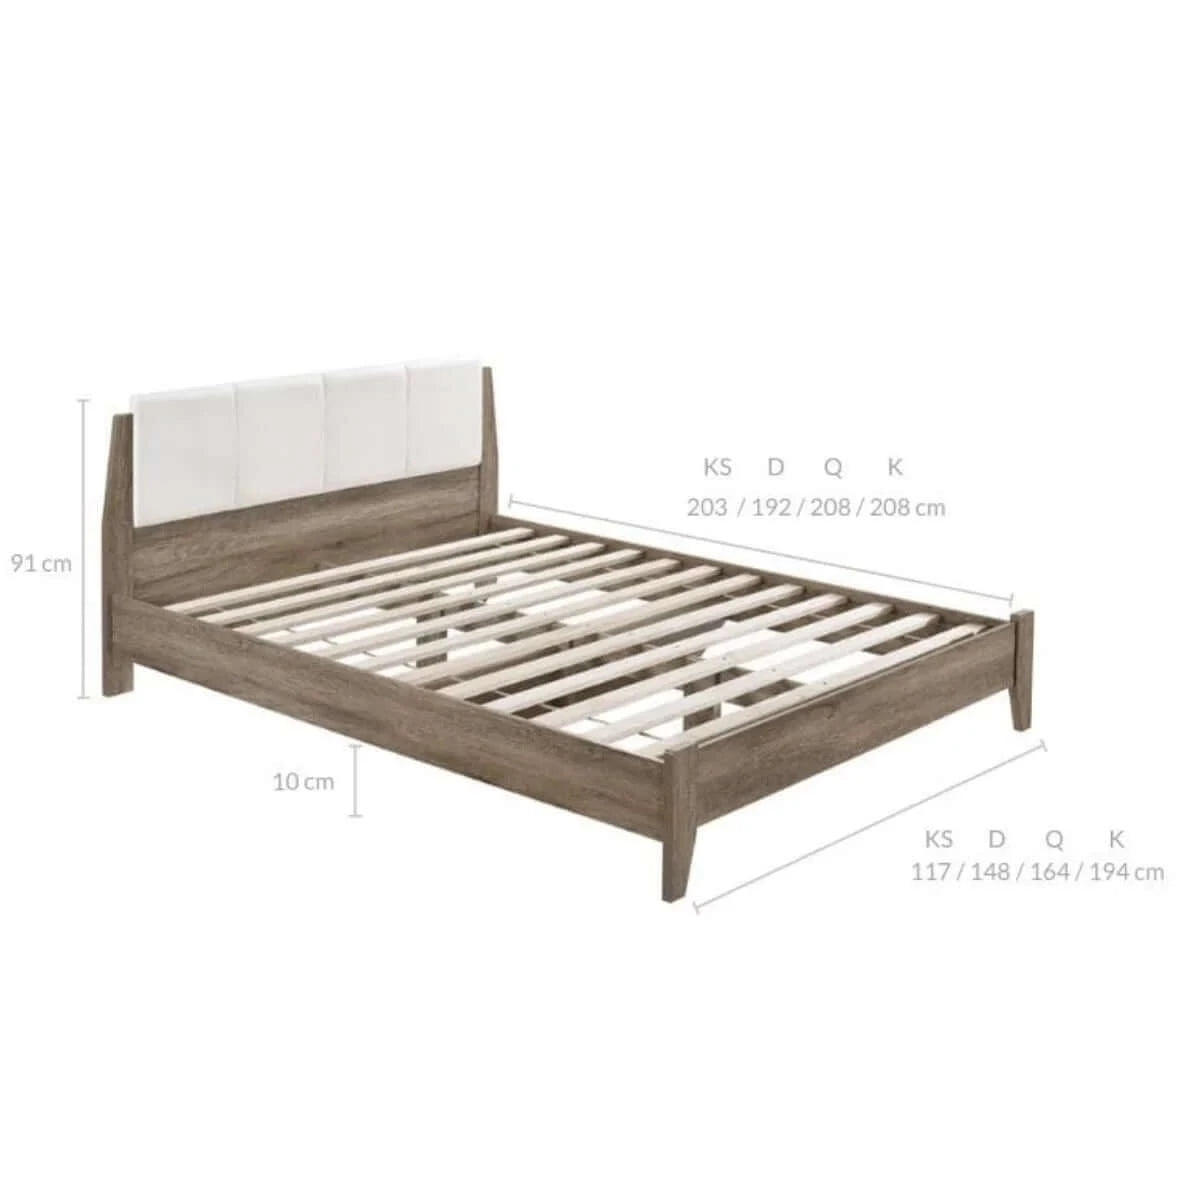 Buy wooden bed frame with leather upholstered bed head size double - upinteriors-Upinteriors